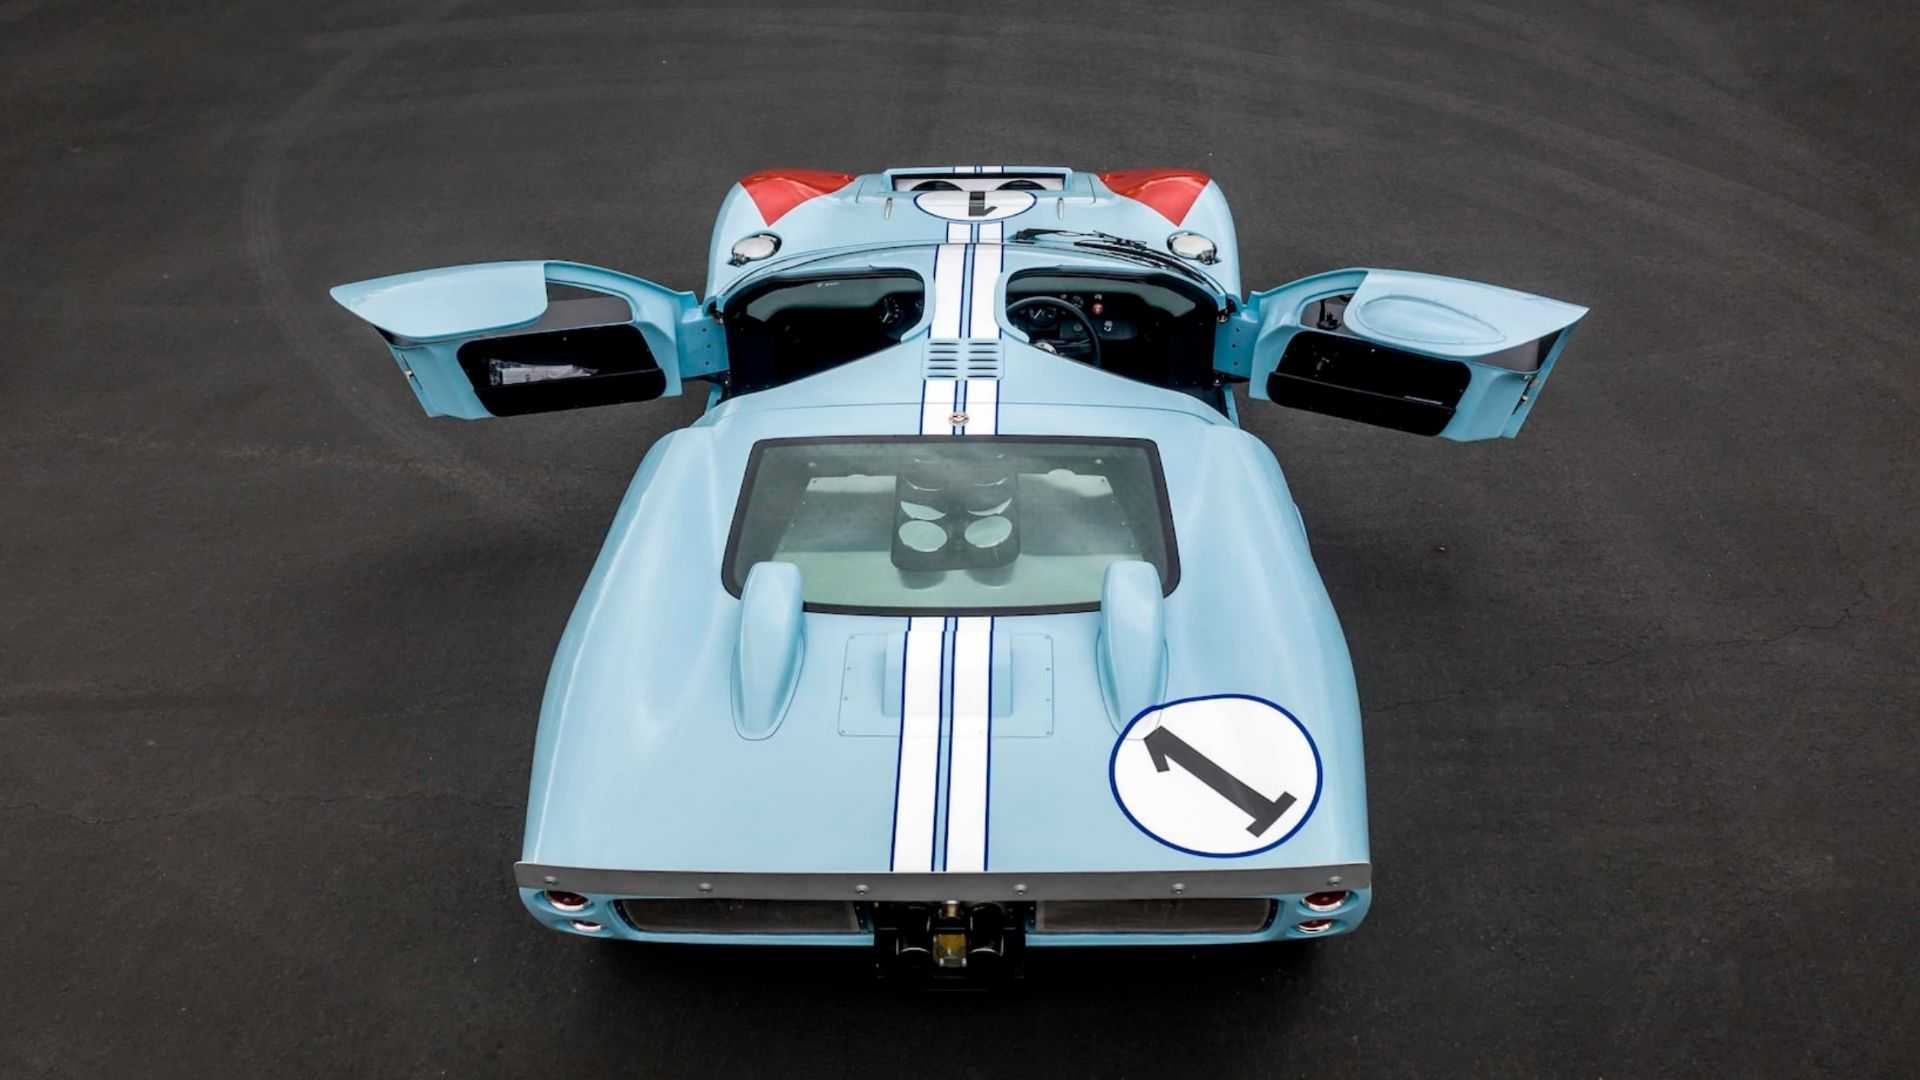 Replica Ken Miles Hero Gt40 Mkii Sells For 440k At Auction